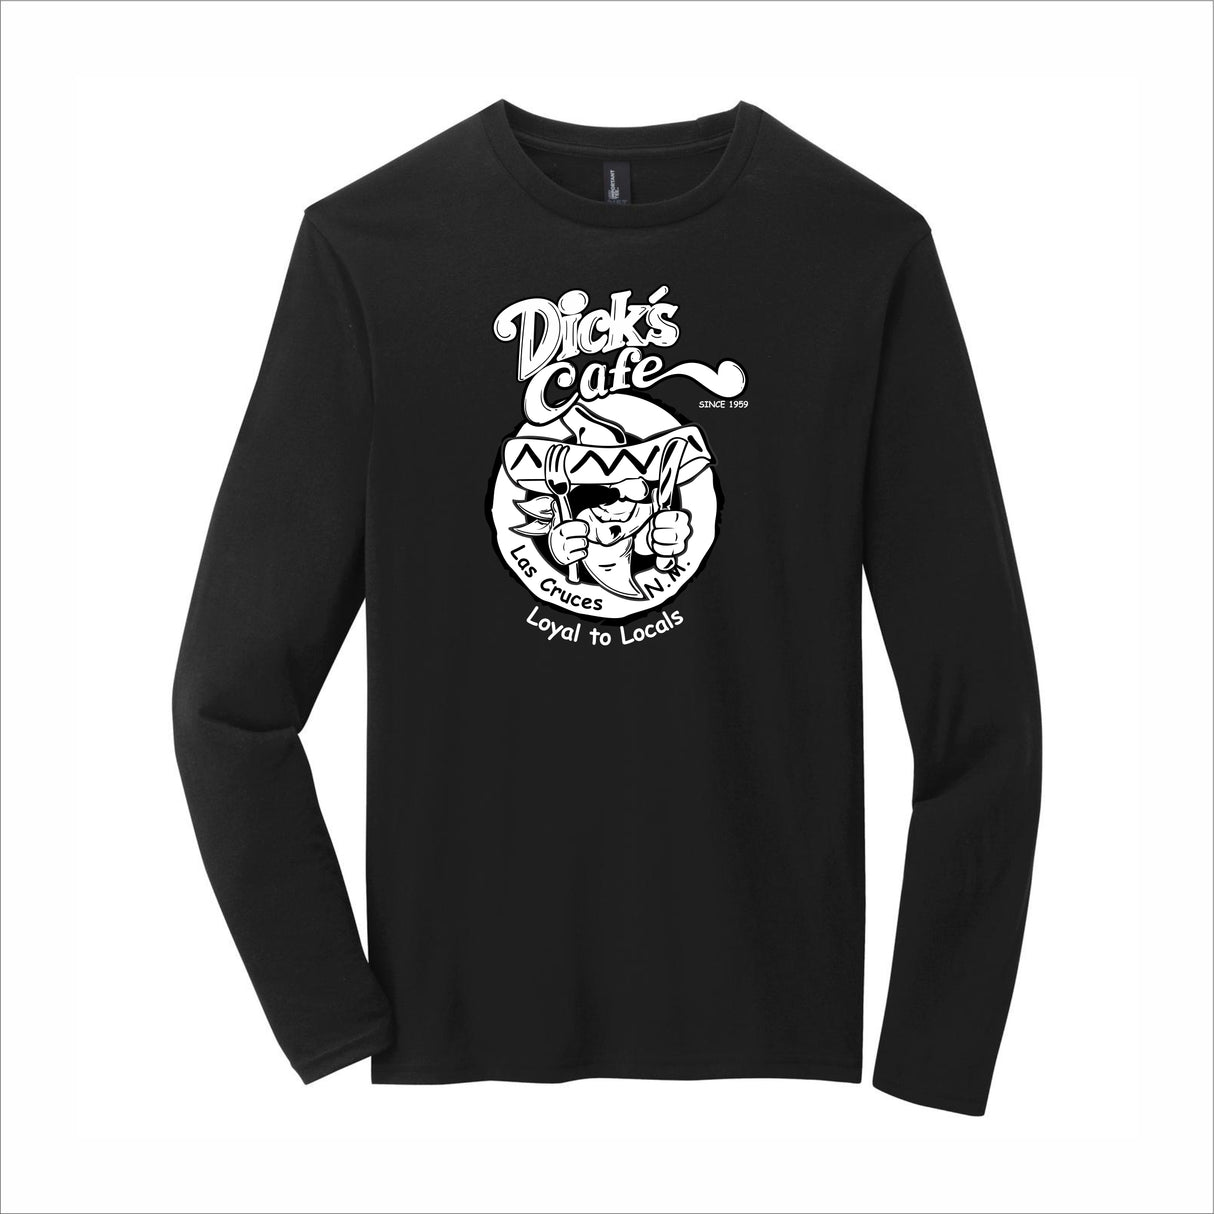 Dick's Cafe Loyal To Locals Long-Sleeve Tee